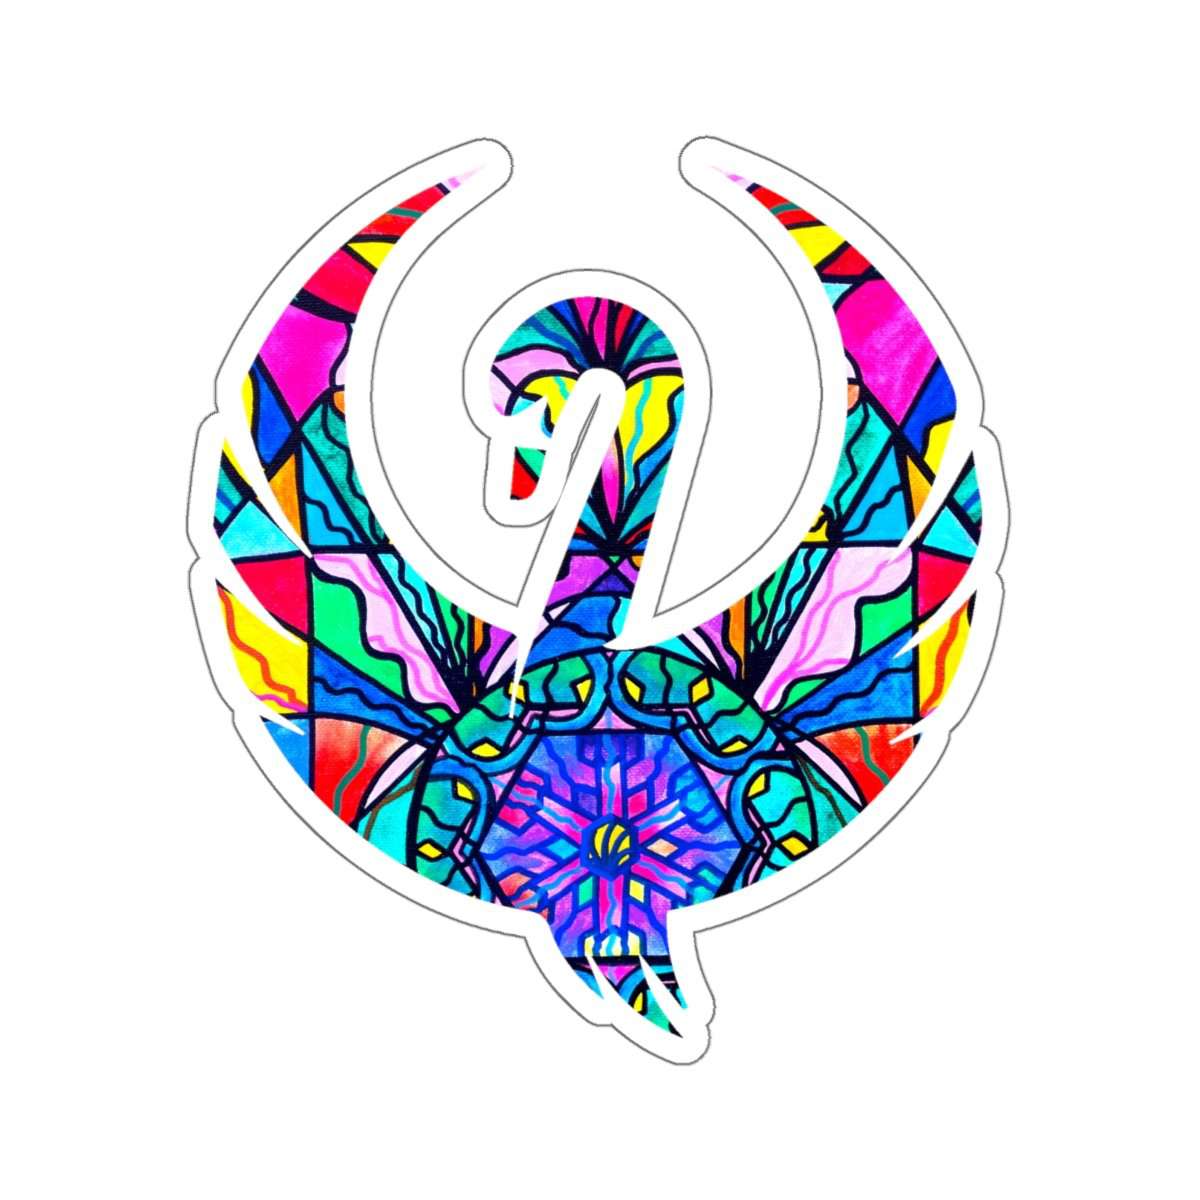 be-the-first-to-own-the-newest-anahata-heart-chakra-swan-stickers-supply_9.jpg